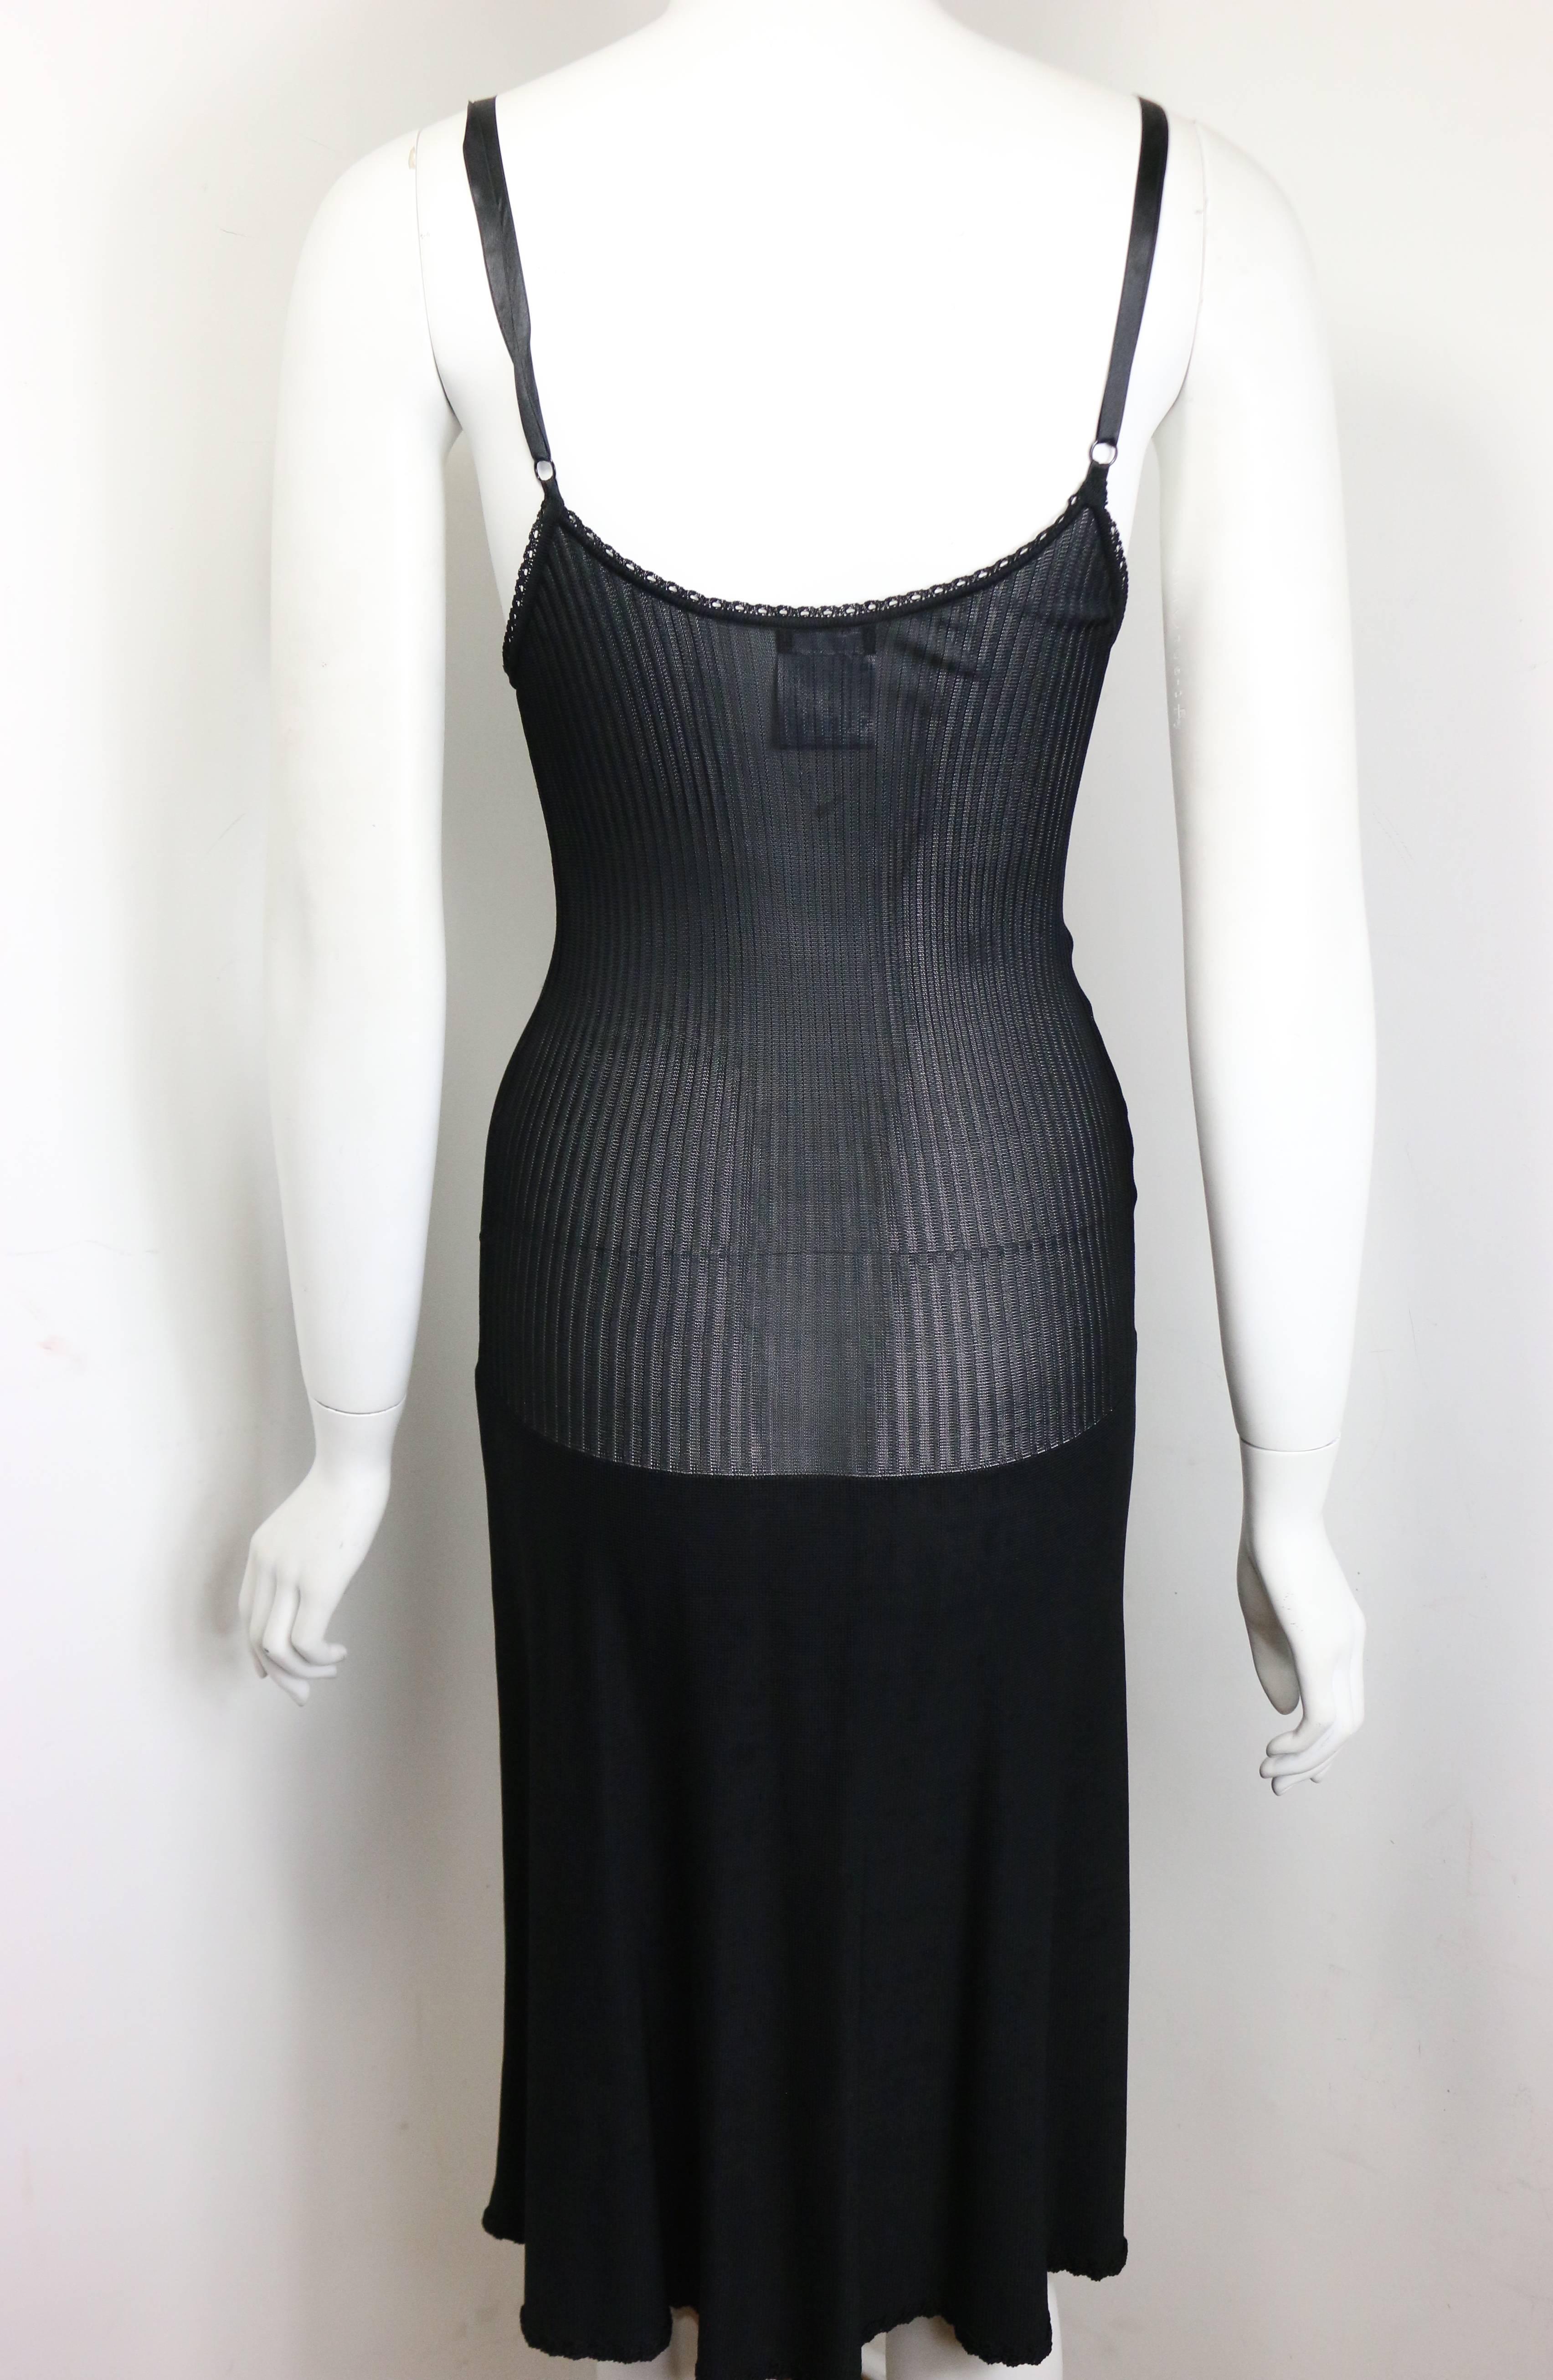 - Year 2008p Chanel black spaghetti strap knitted dress featuring a black lace bust area, light knitted in the middle, and knitted bottom. A black rhinestones 